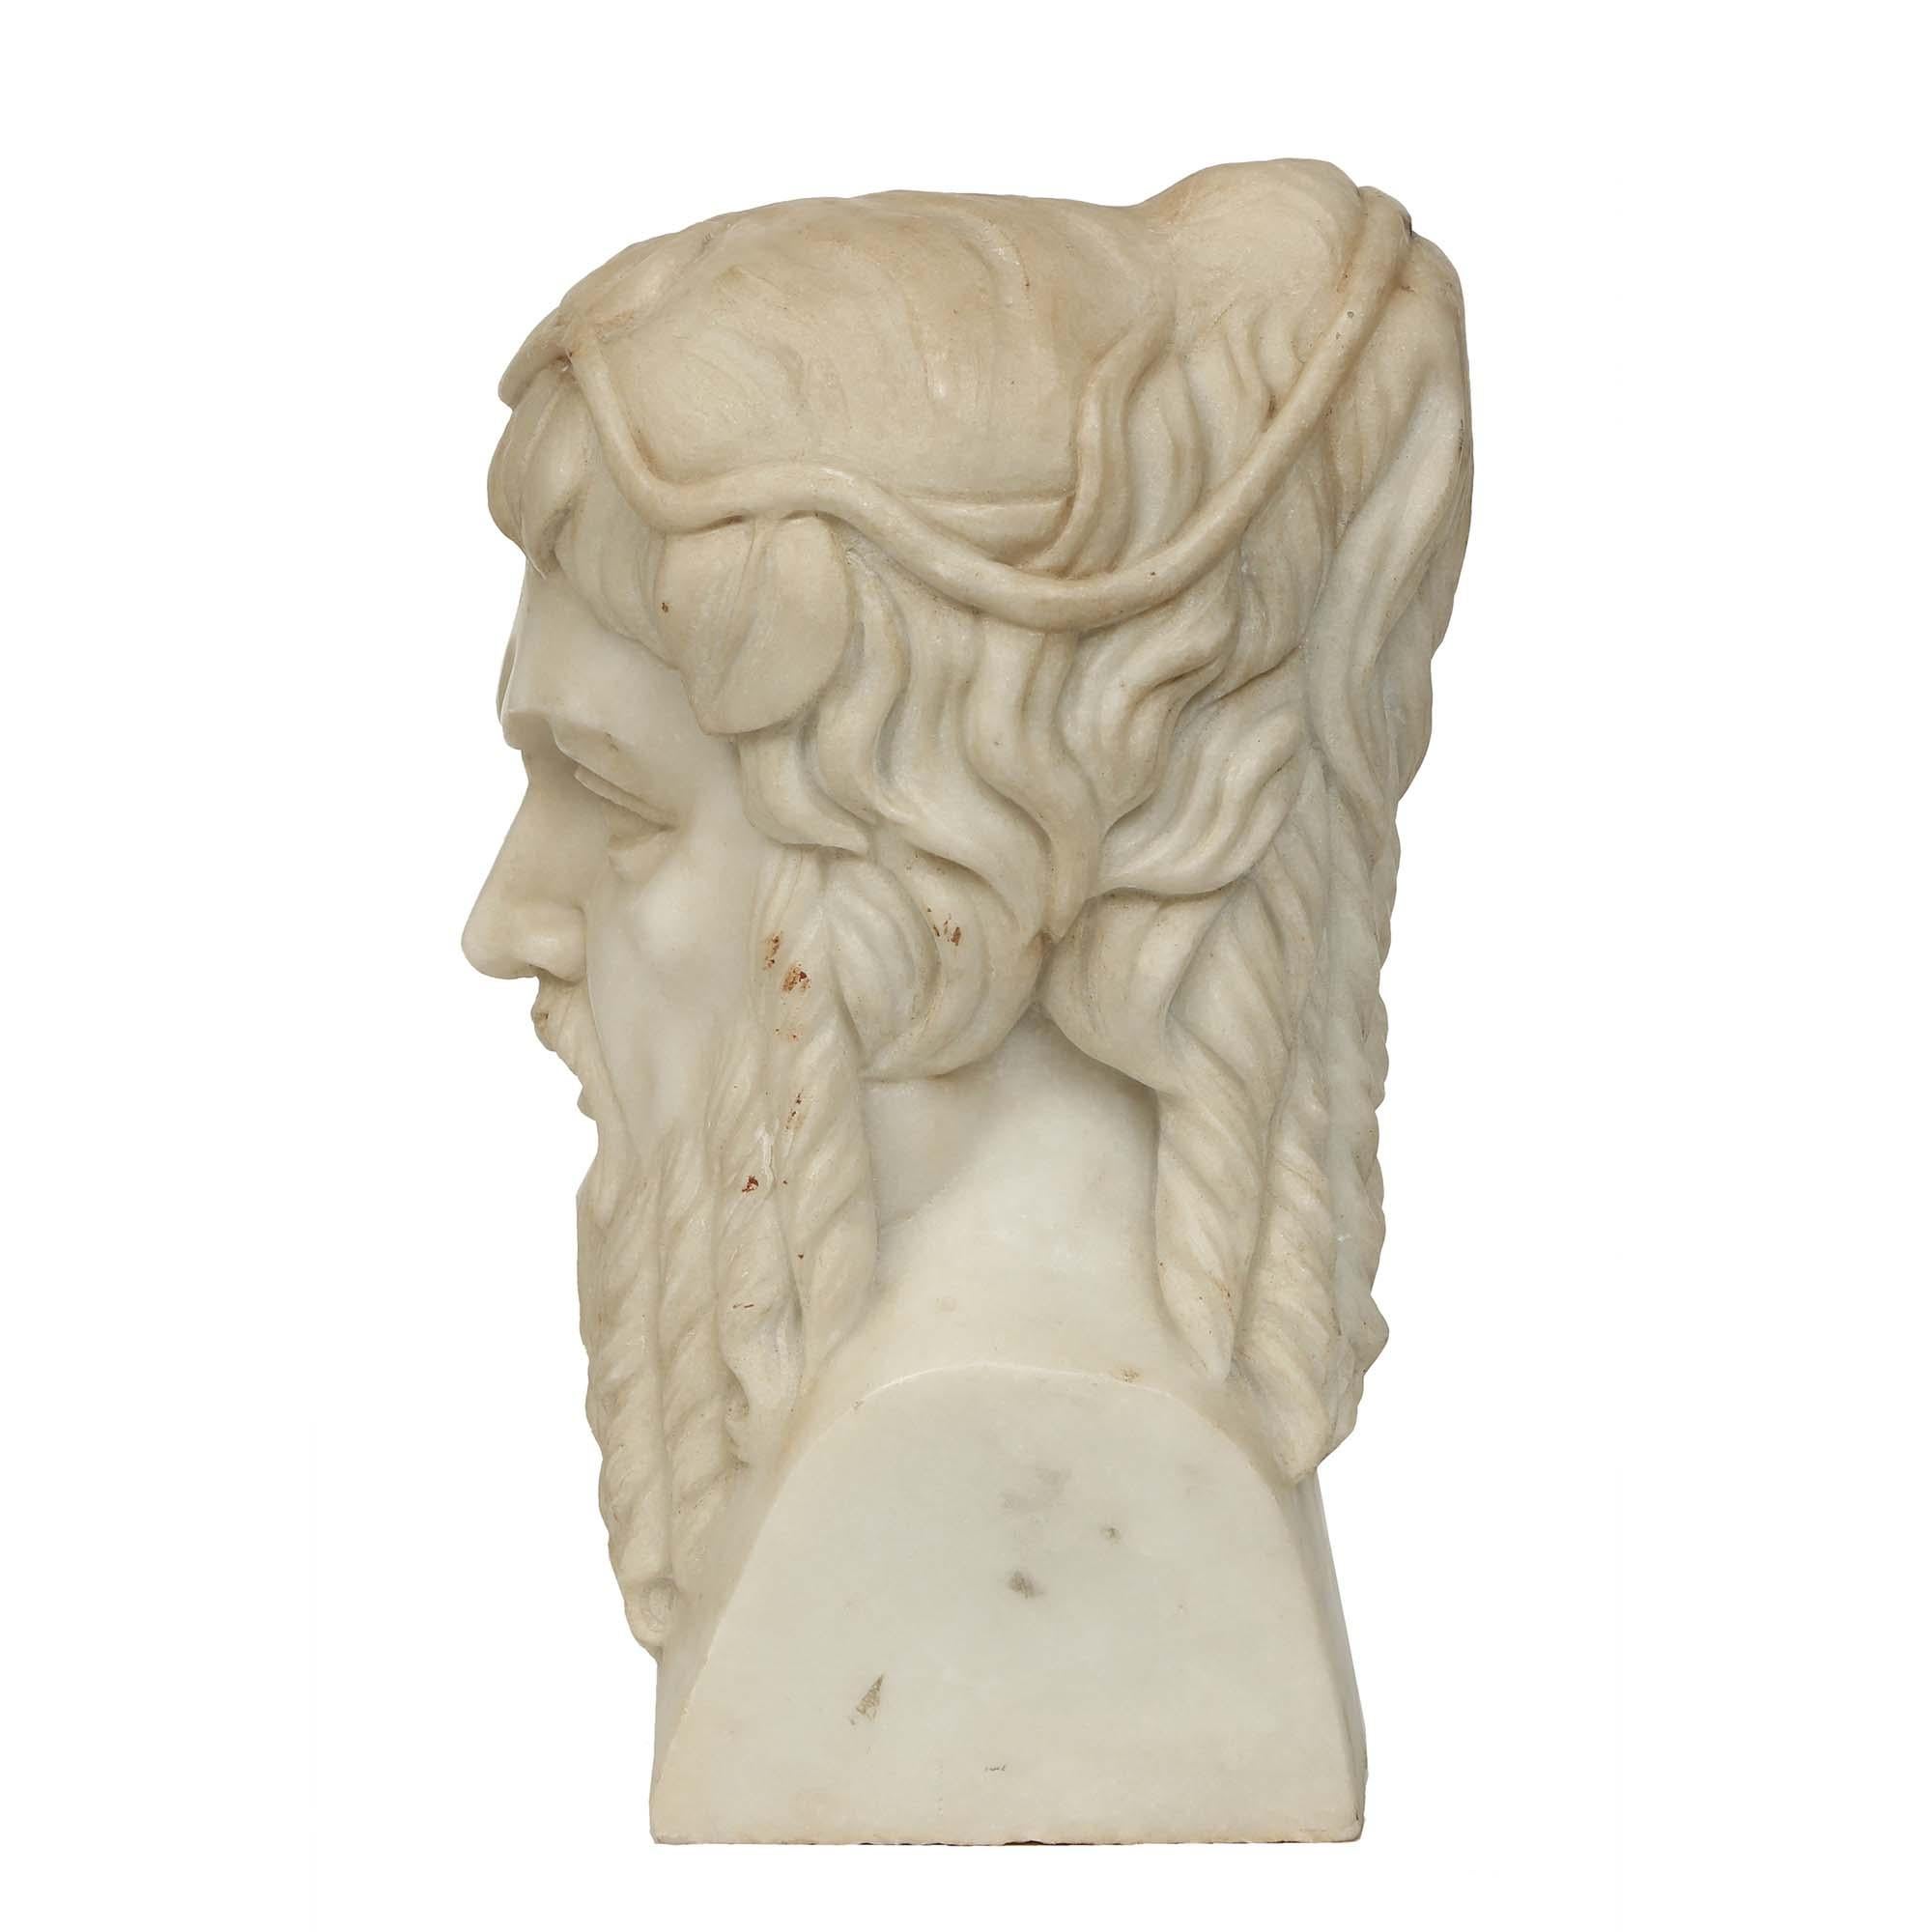 Italian 19th Century White Carrara Marble Impeccably Carved Bust In Good Condition For Sale In West Palm Beach, FL